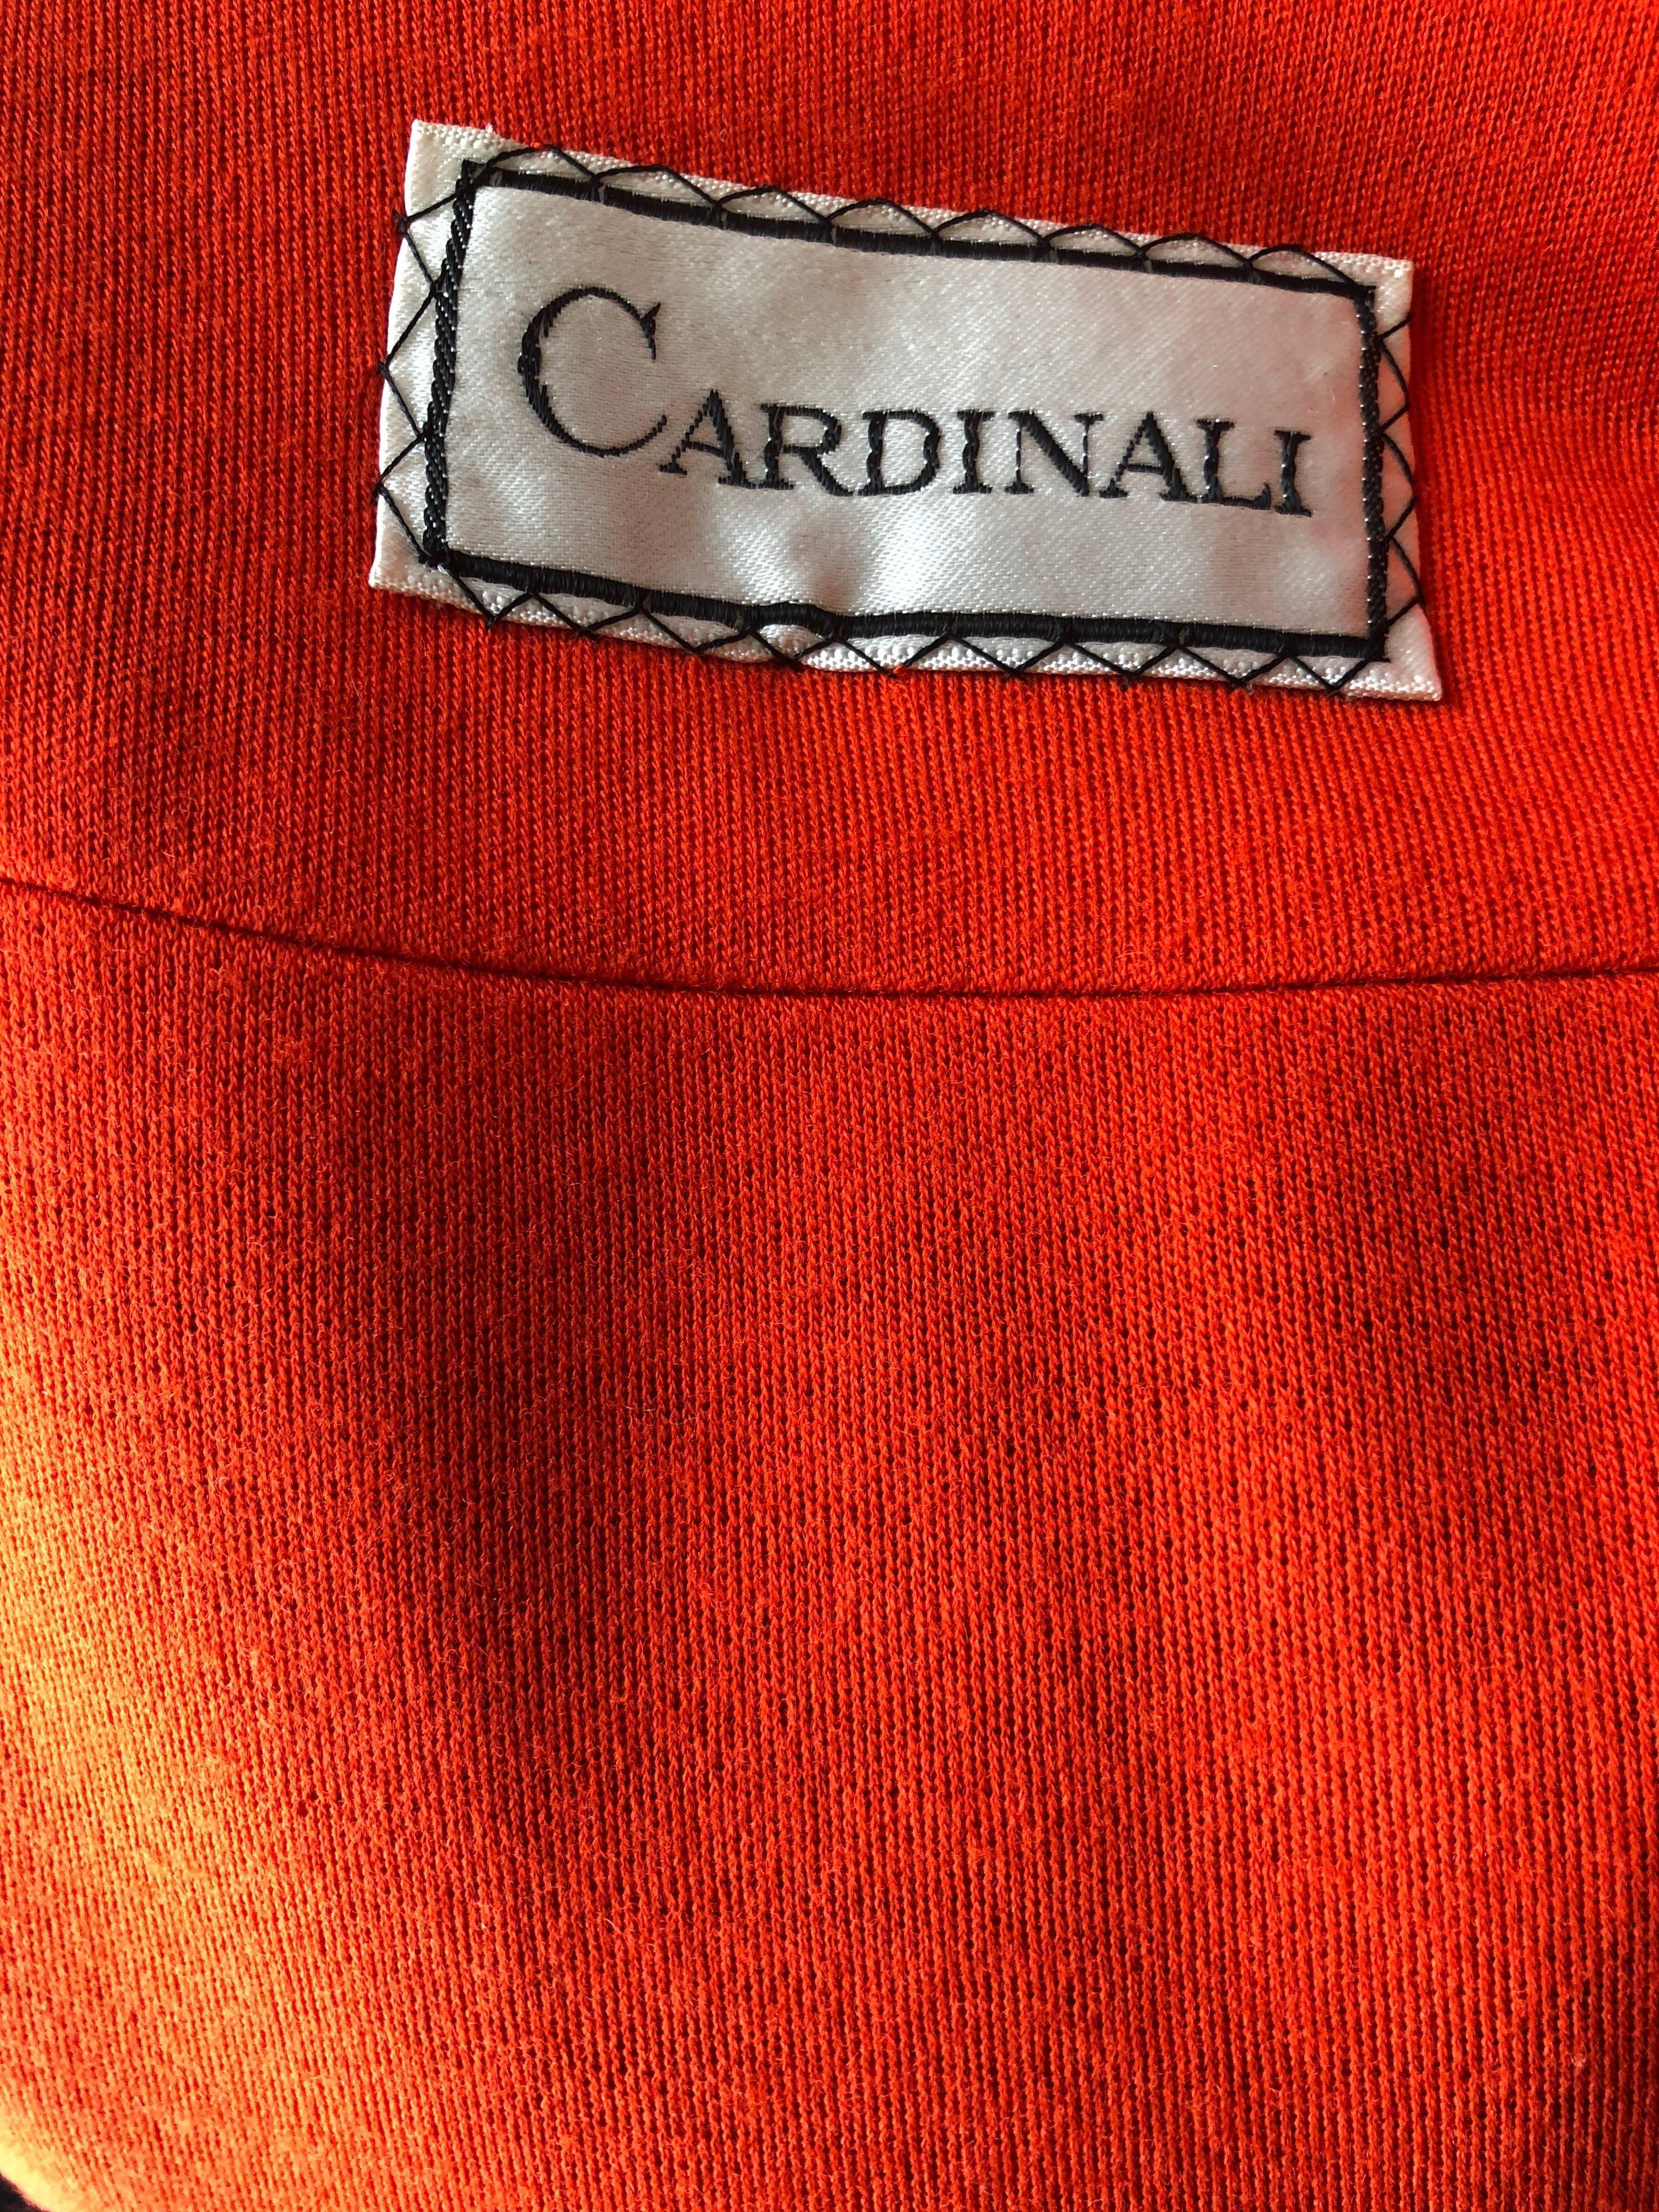 Cardinali 1970 Black Wool Coat with Orange Lining and Matching Skirt For Sale 7